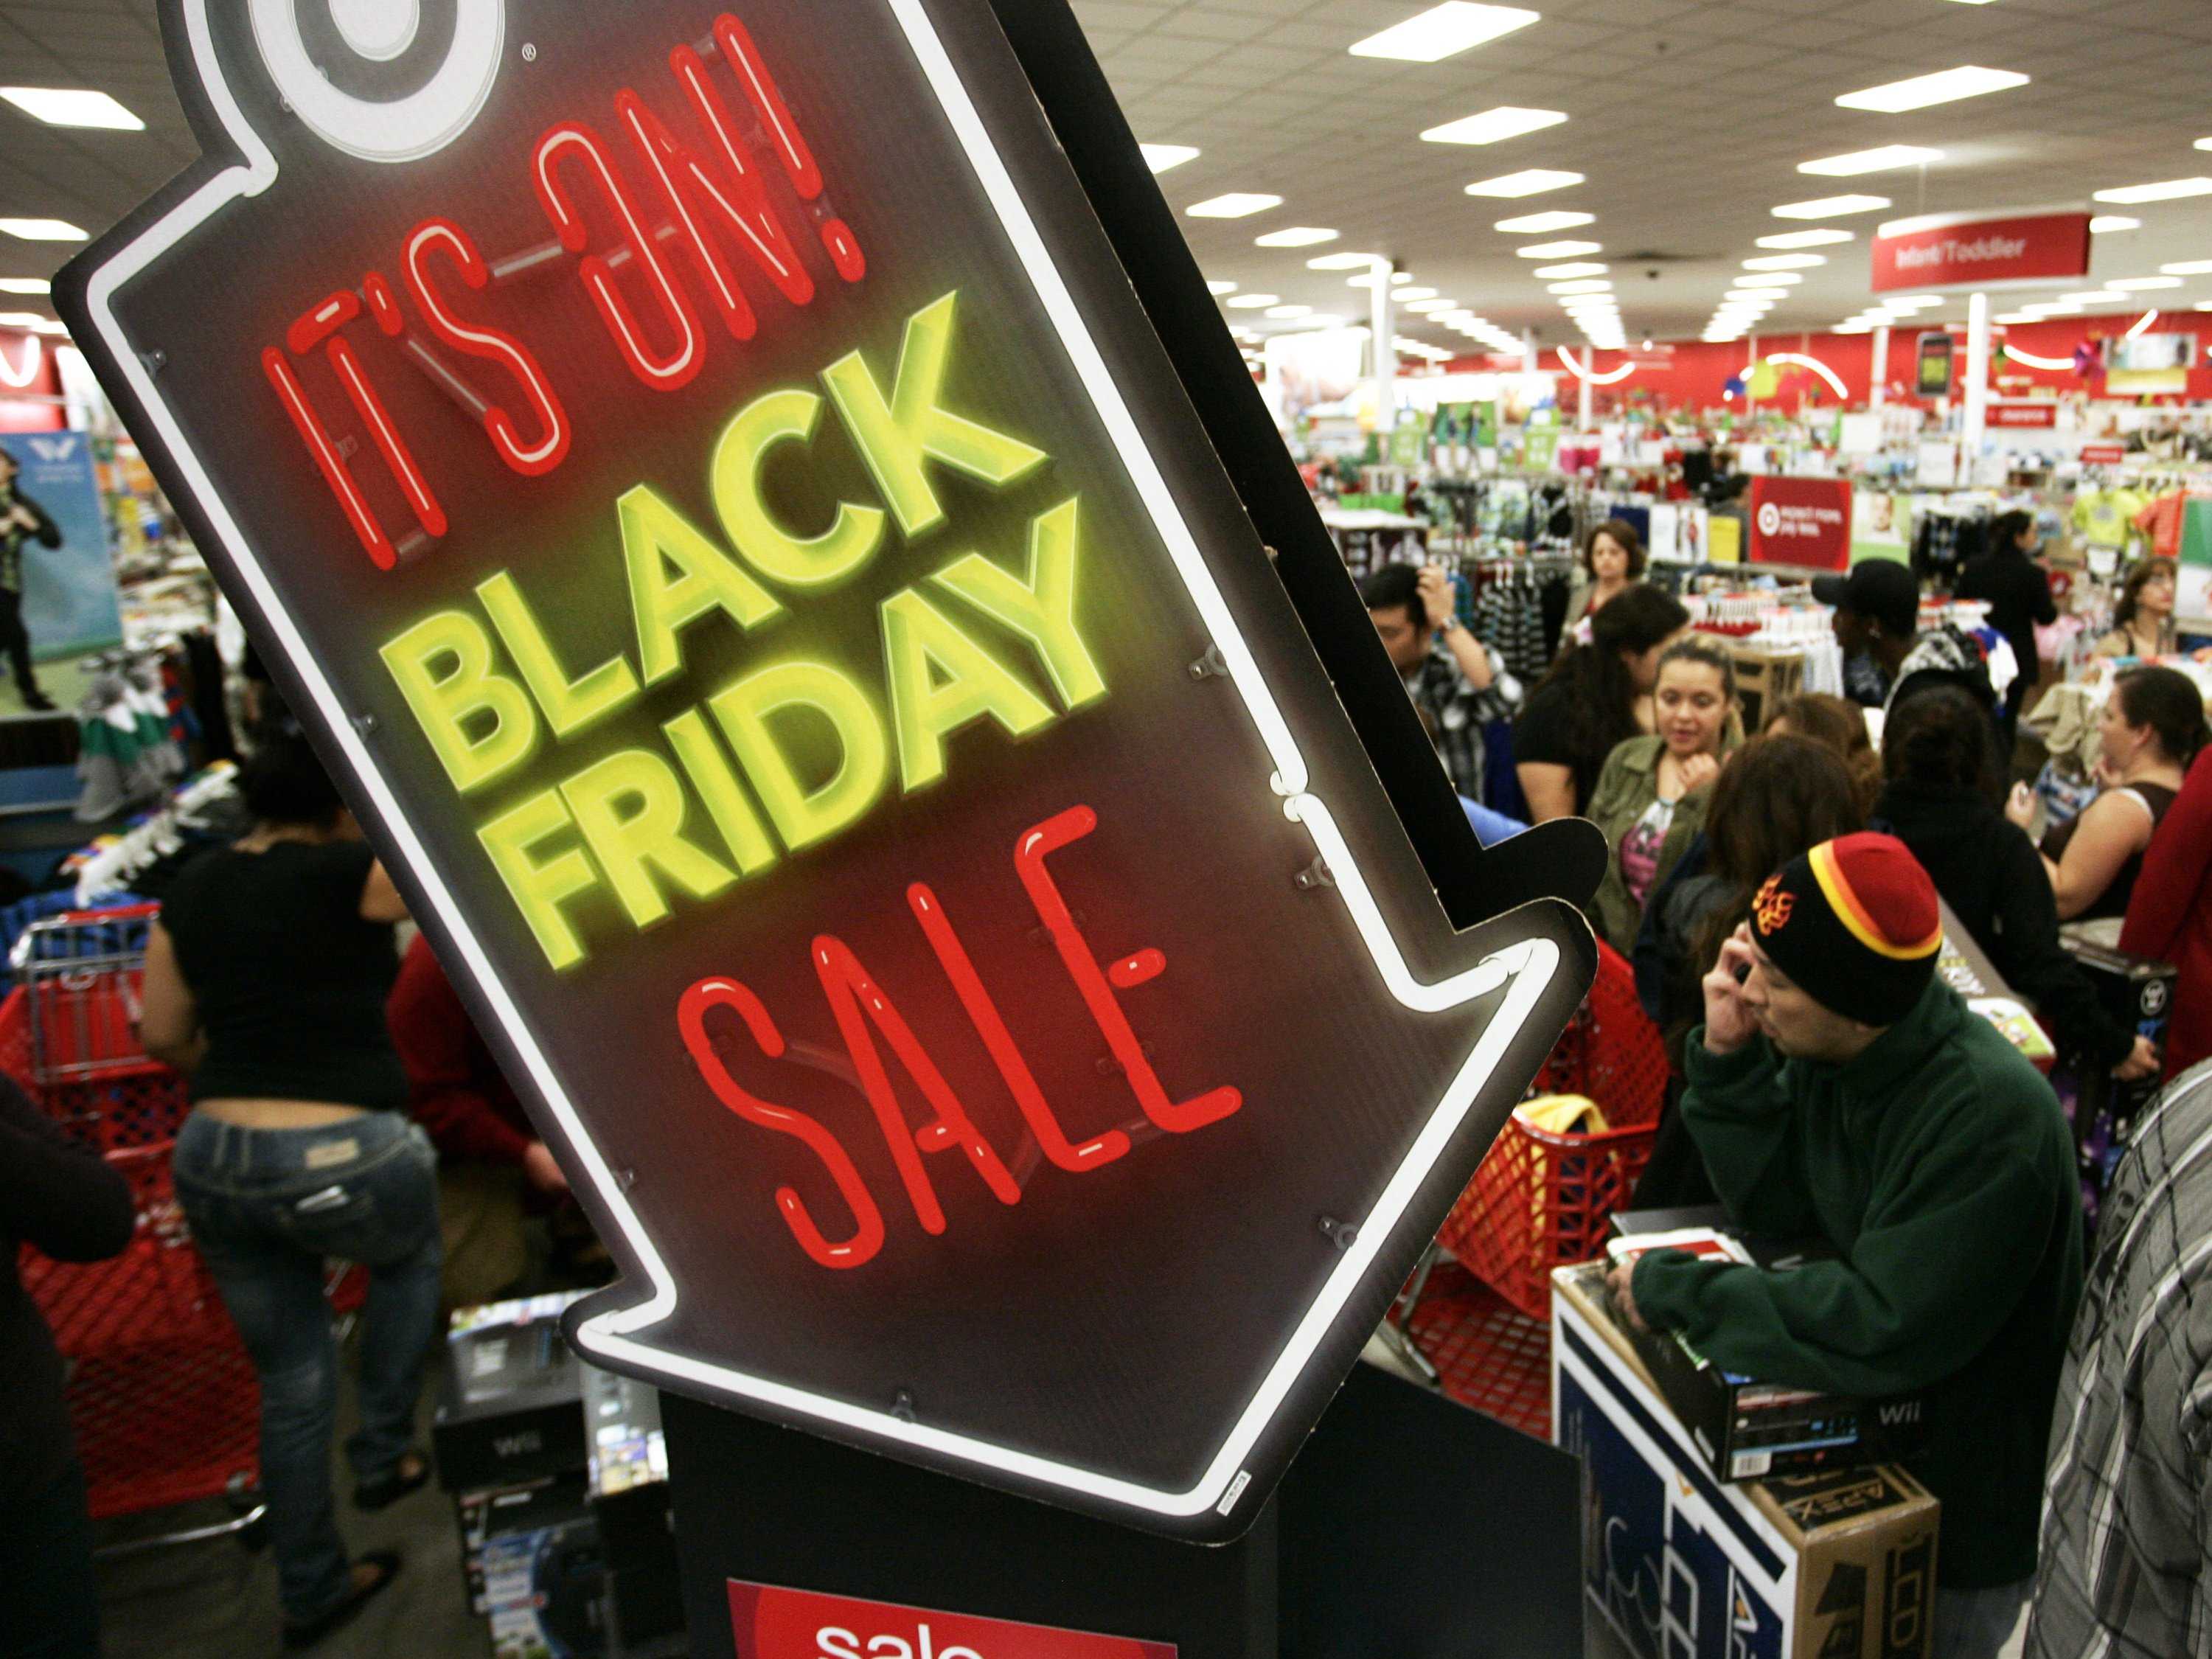 The 15 Stages Of Black Friday We All Experienced – #14 Touched My Heart